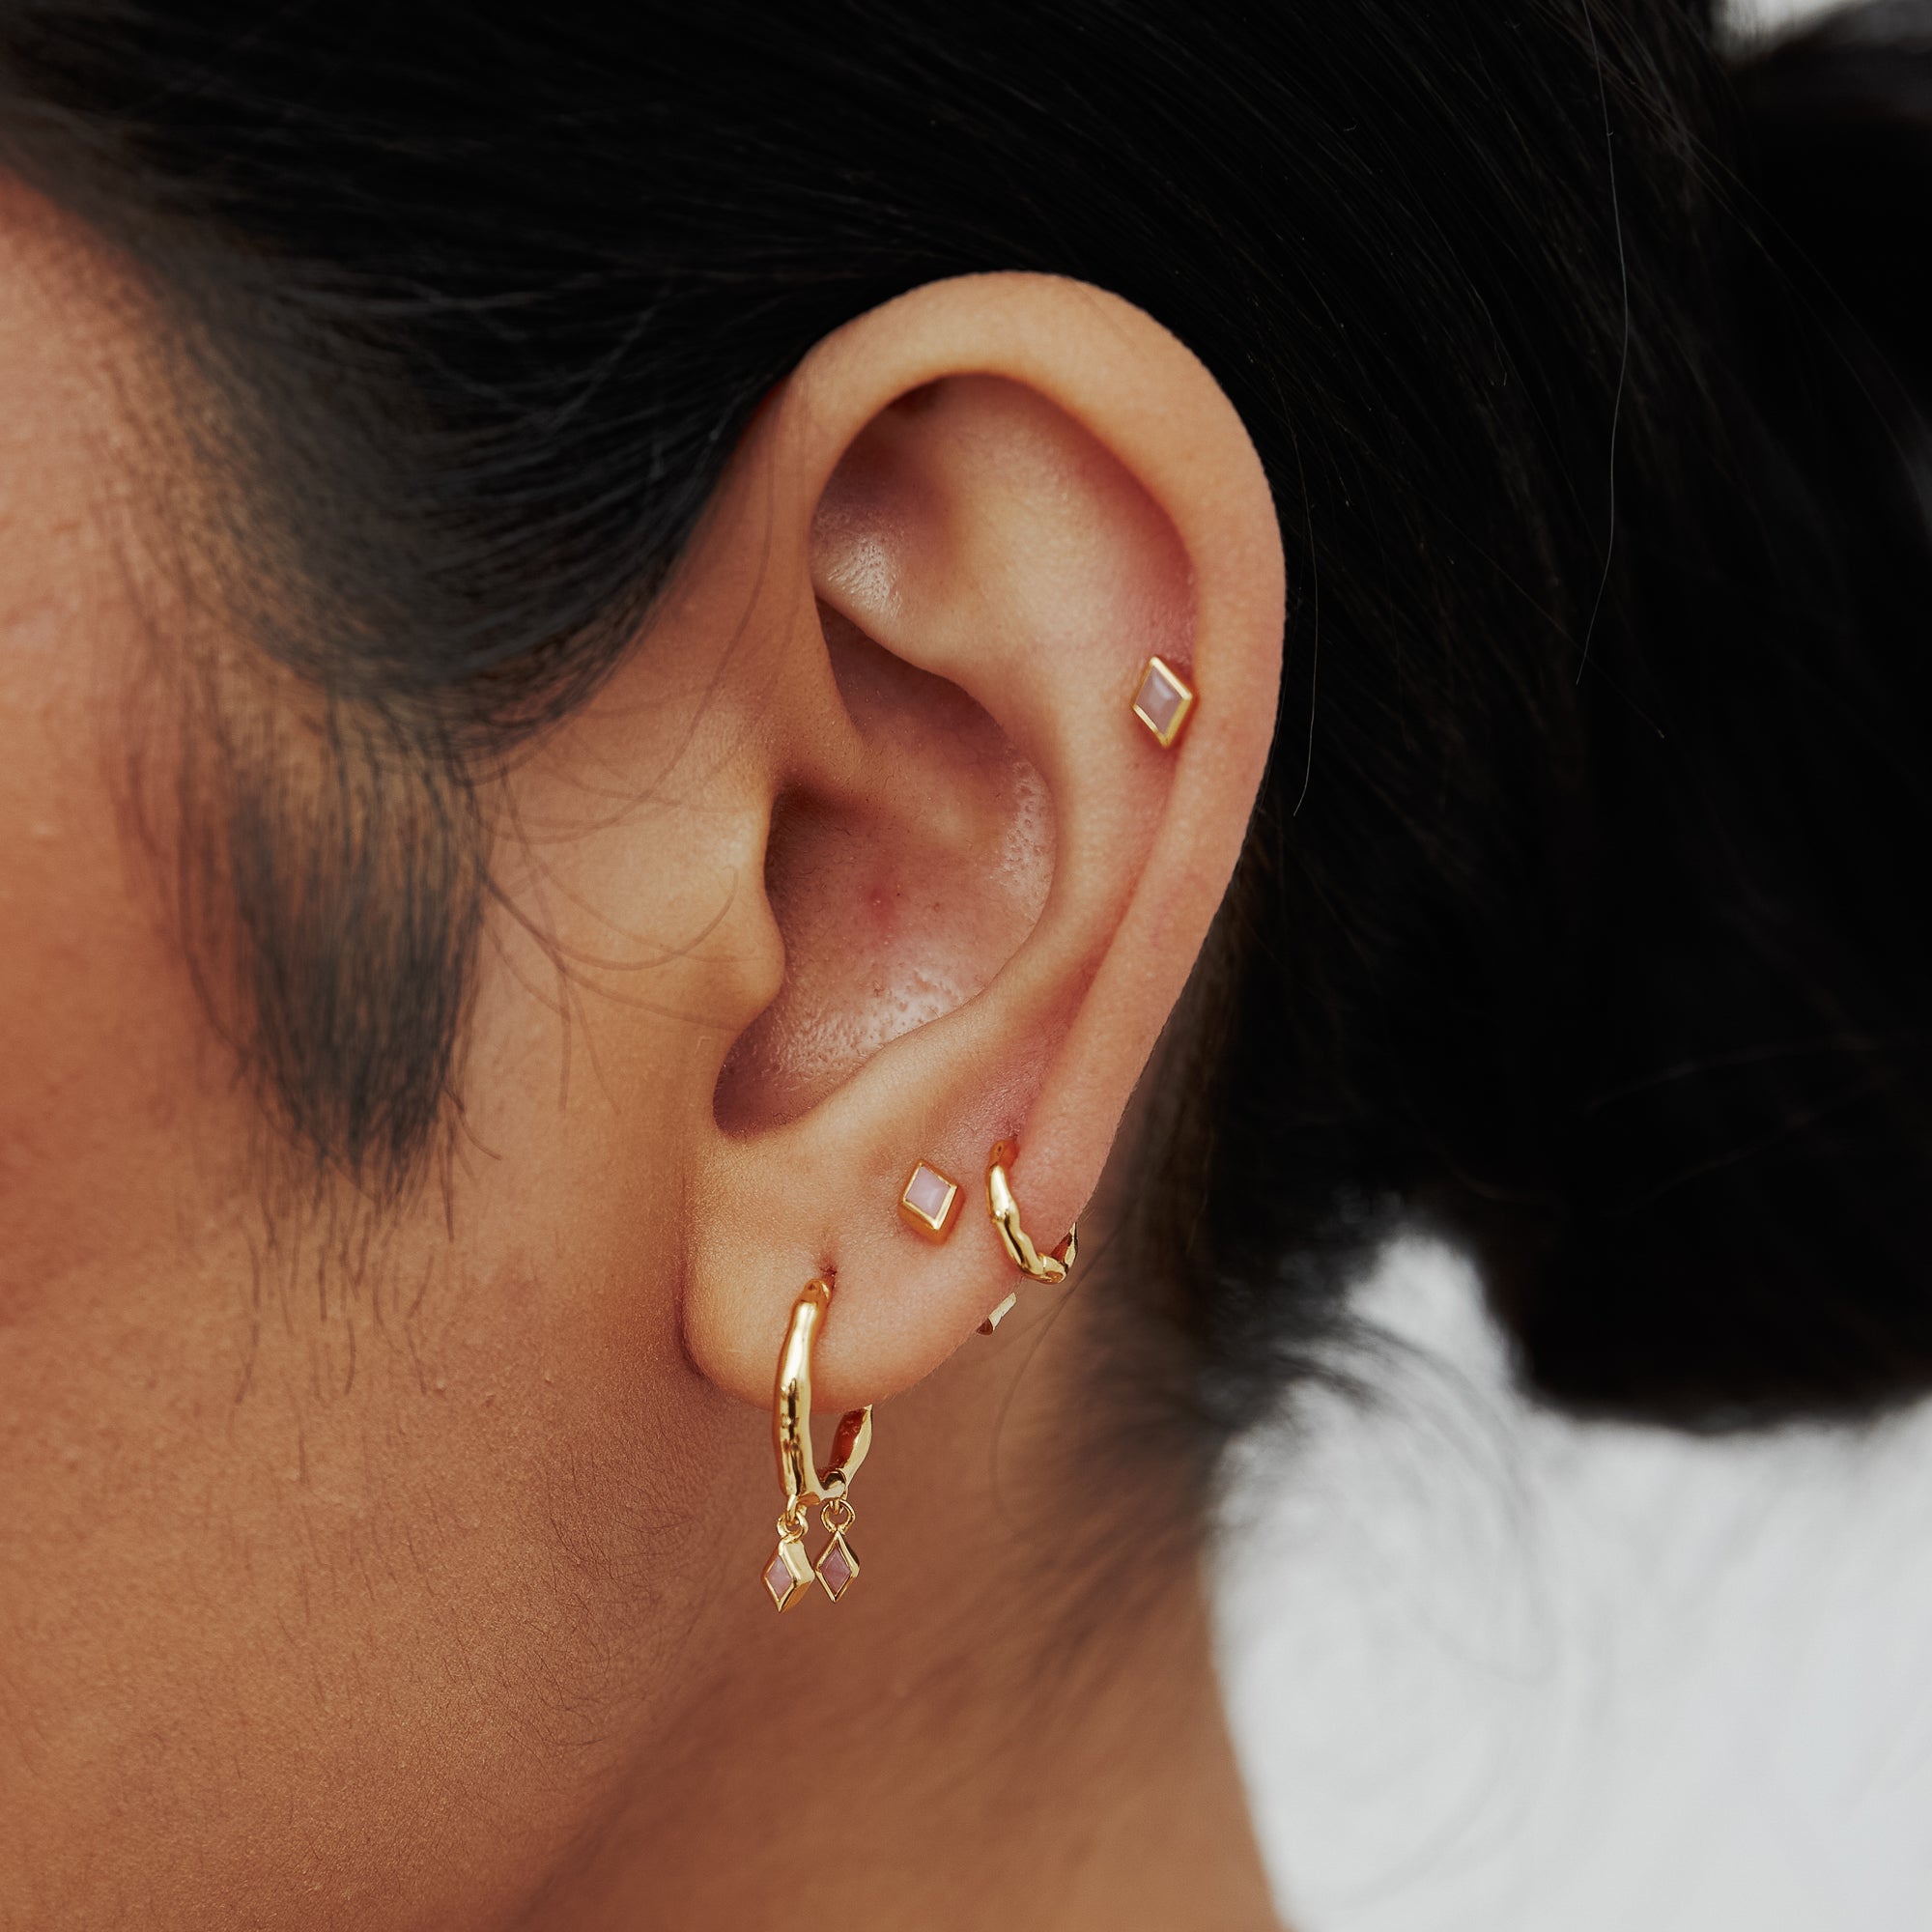 Gold Ethereal Cartilage Clicker Earrings